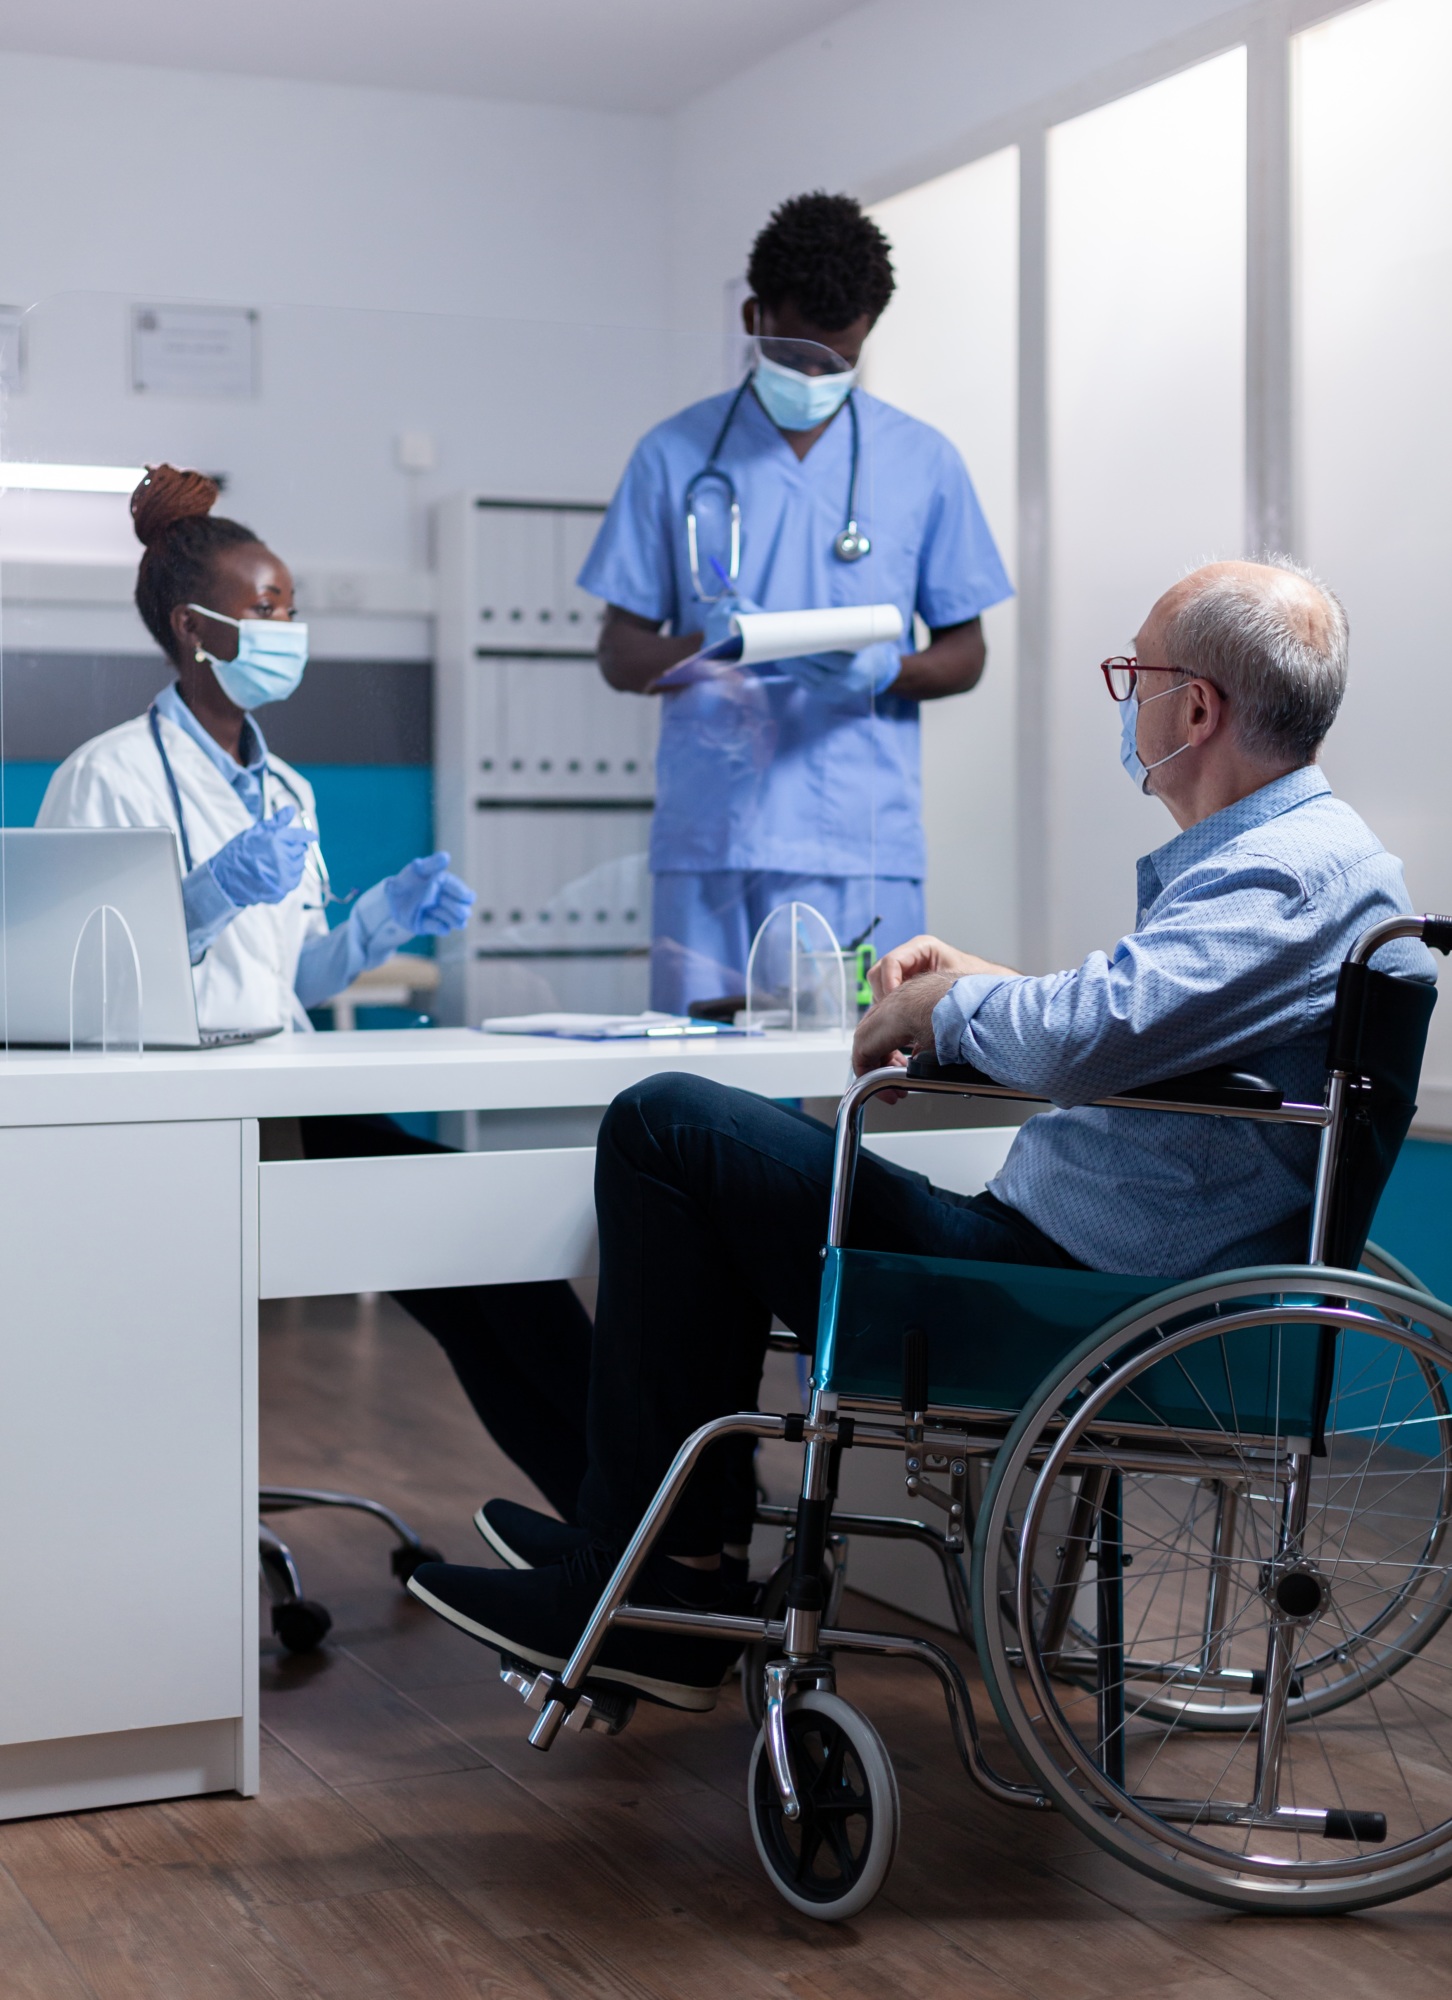 Patient in a Wheelchair Receiving Care, with Masks On